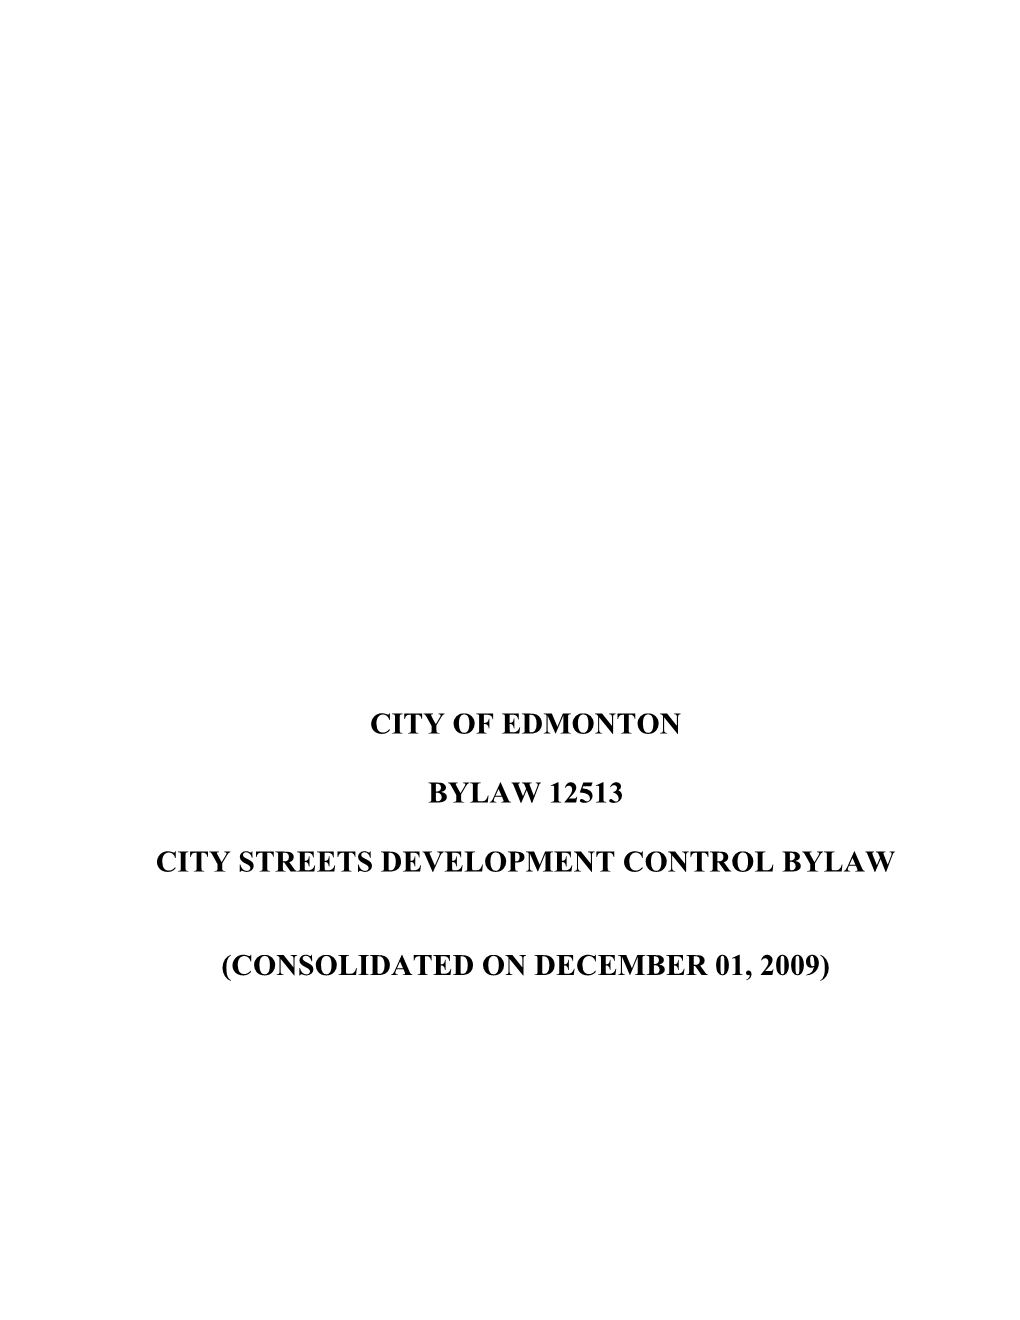 Report for City Council January 15, 2002 Meeting